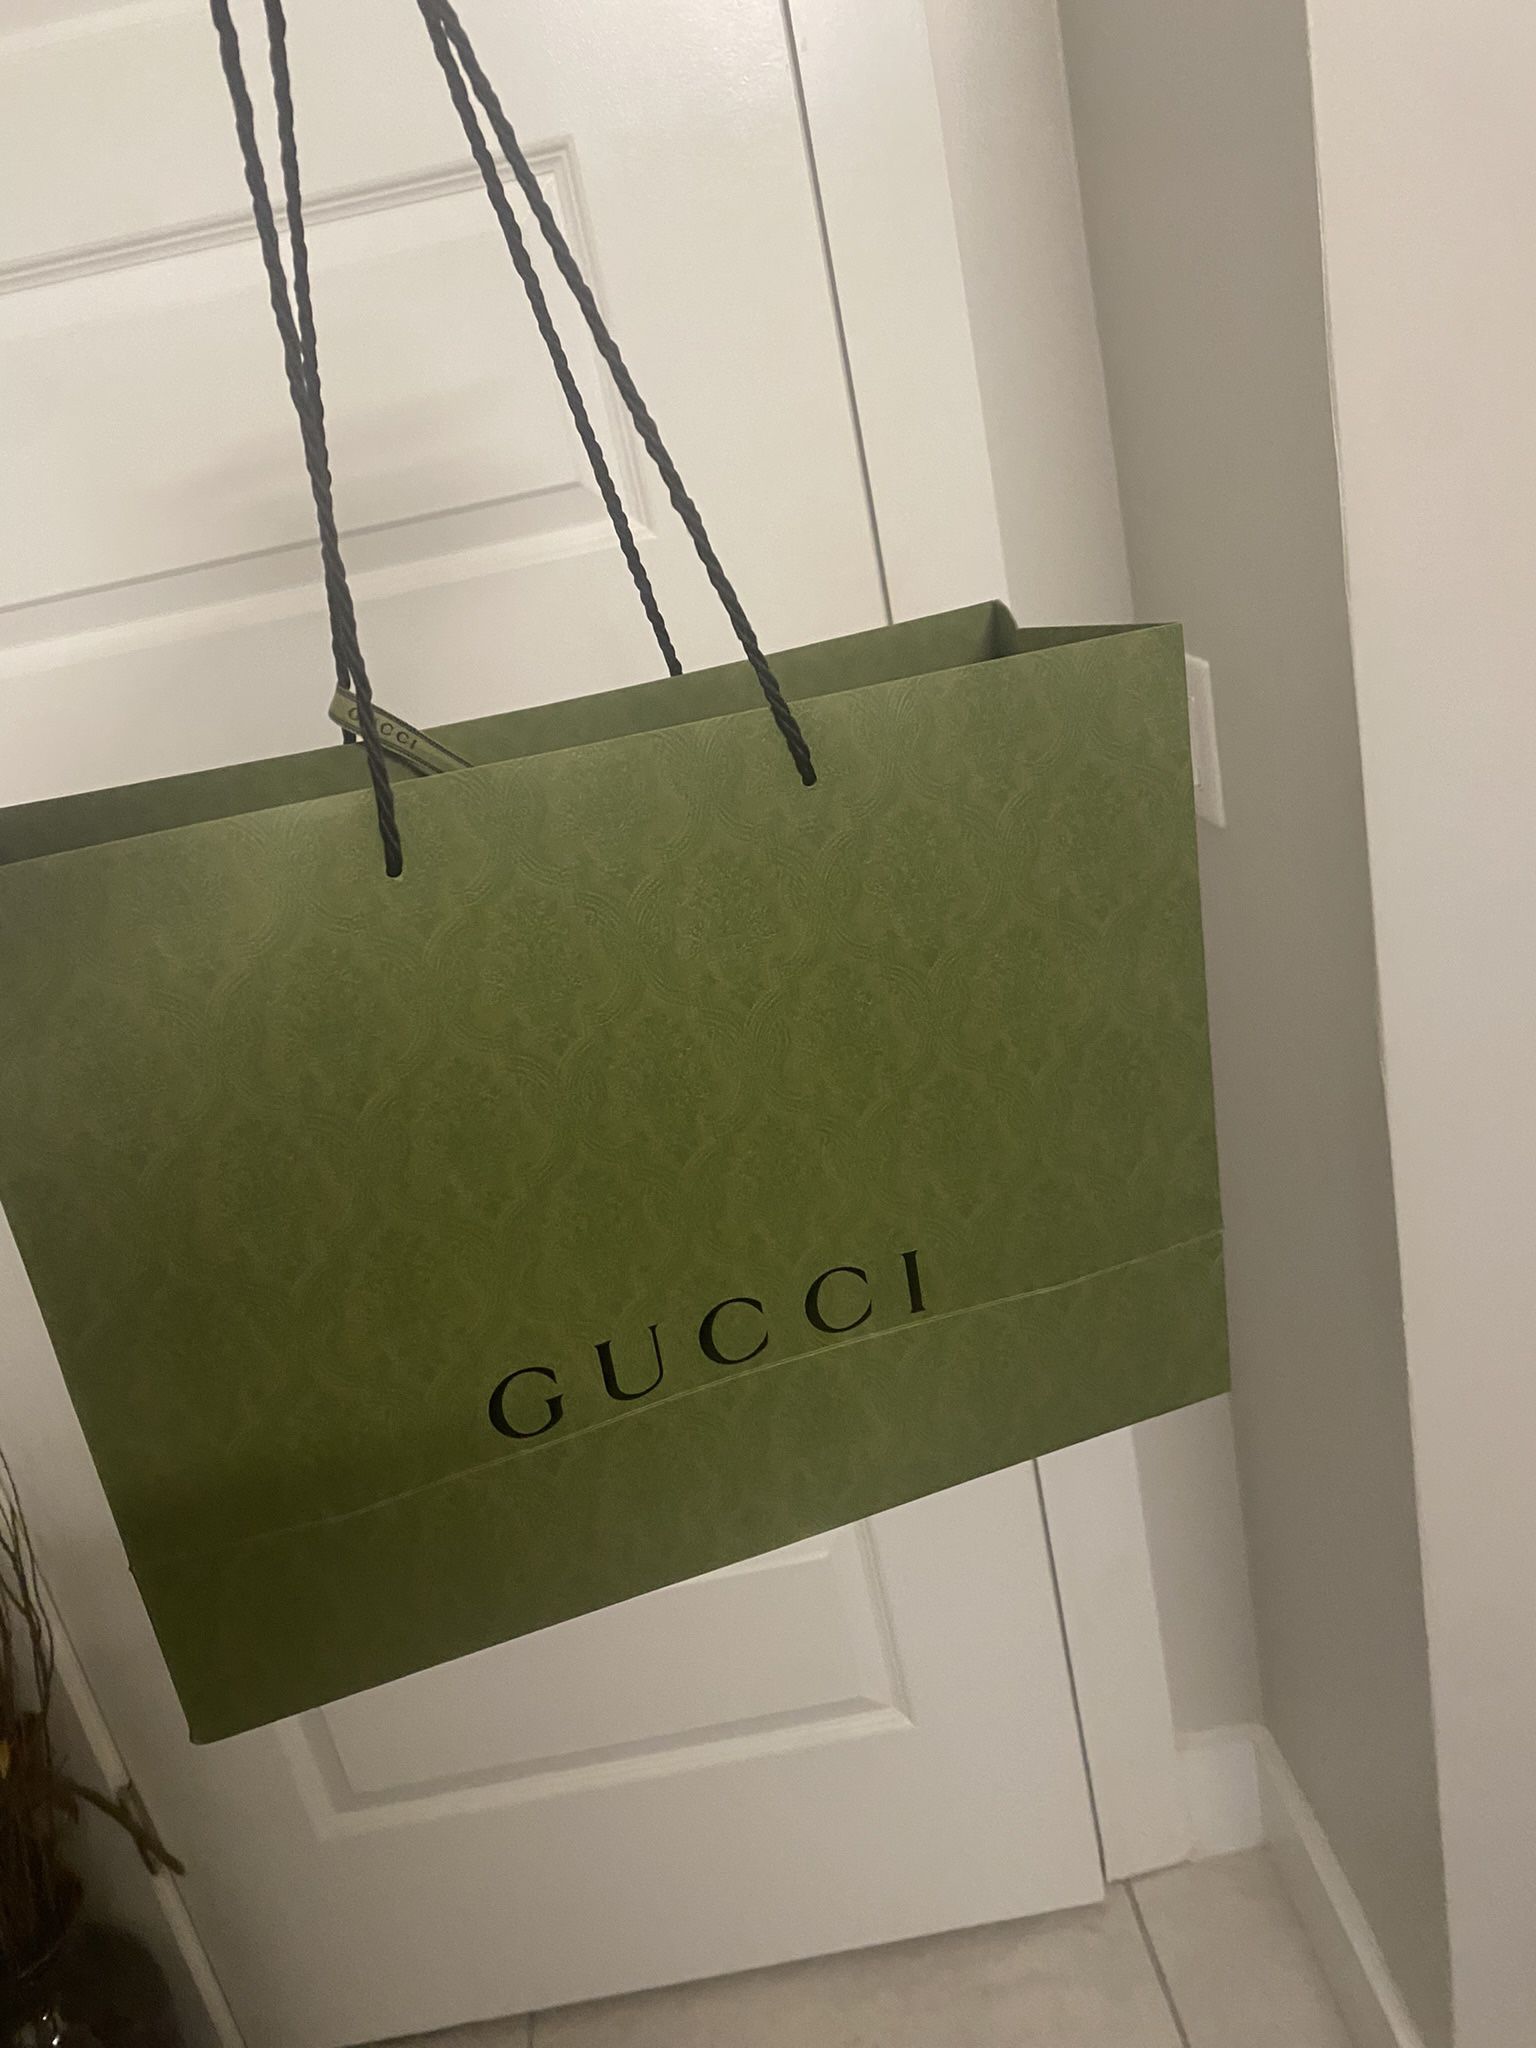 Oversized Gucci Dust Bag for Sale in Biscayne Park, FL - OfferUp